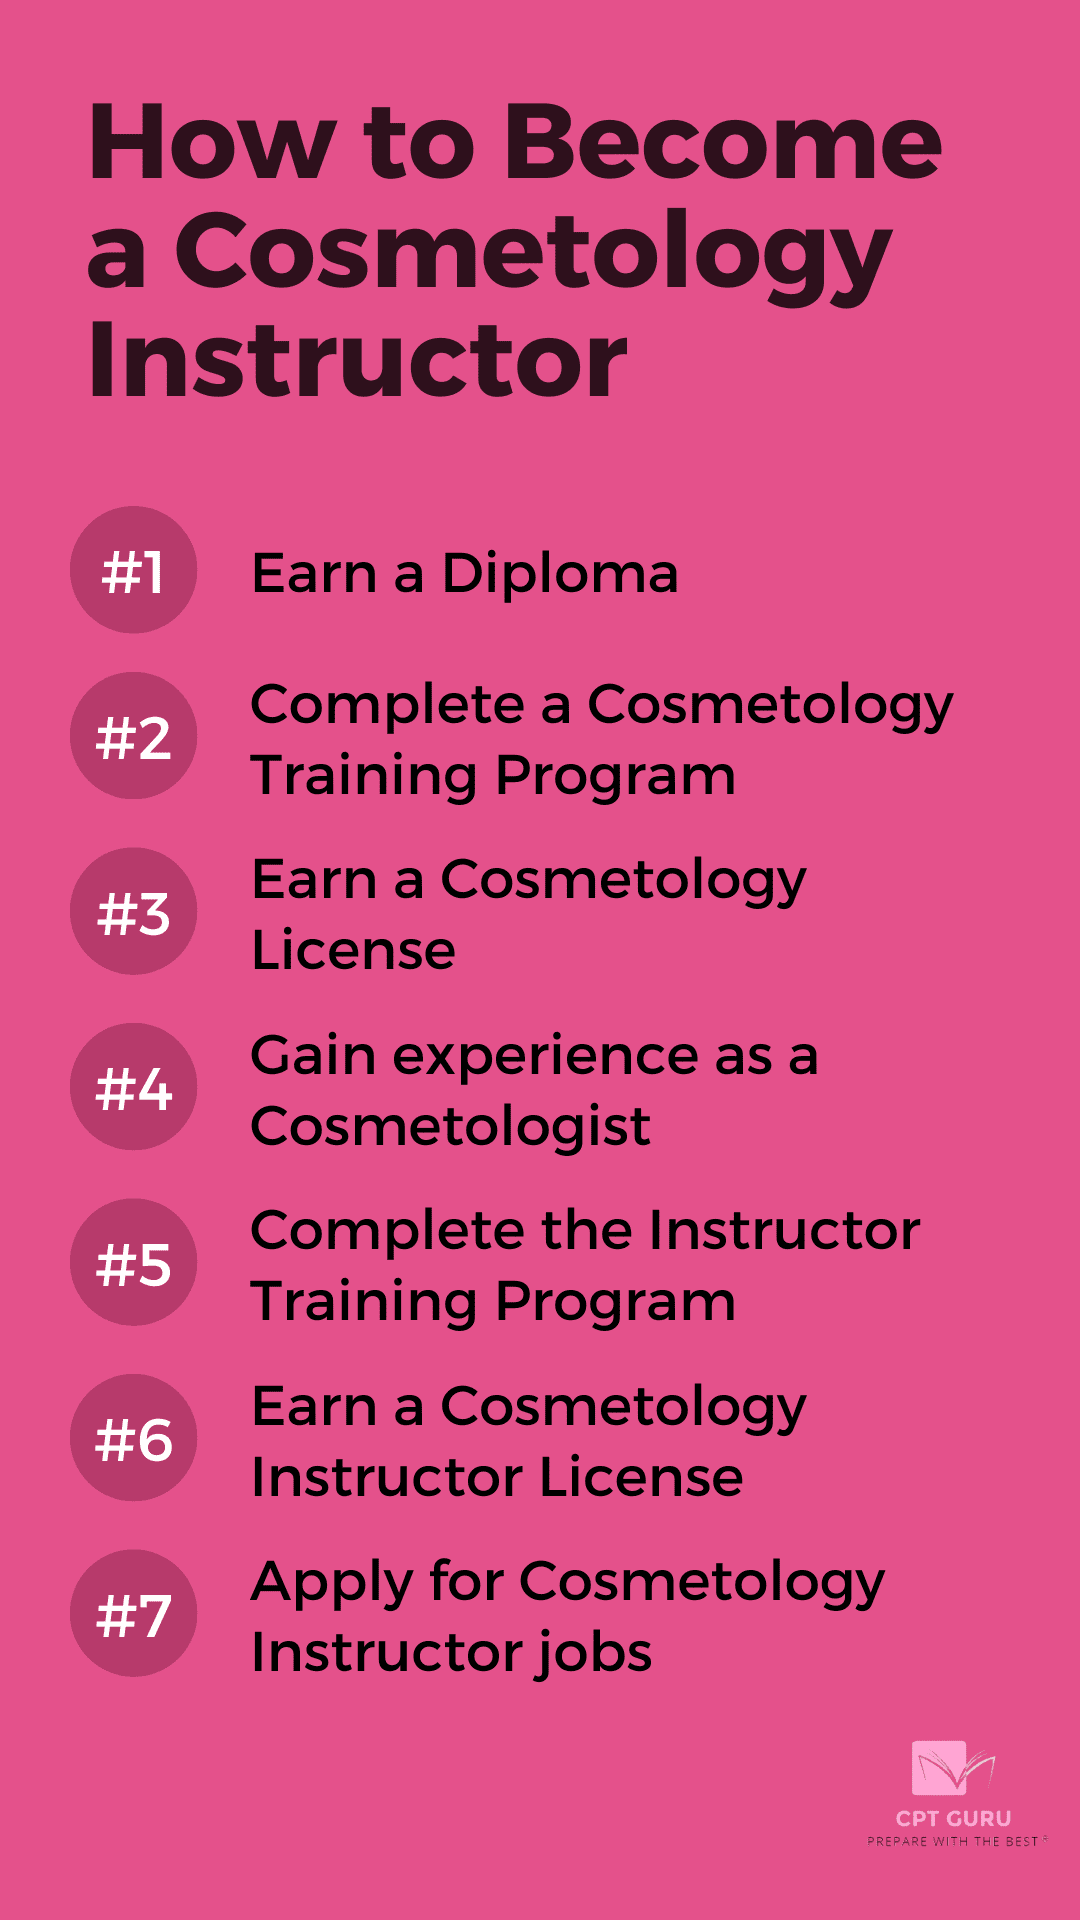 What are the educational requirements for a cosmetologist